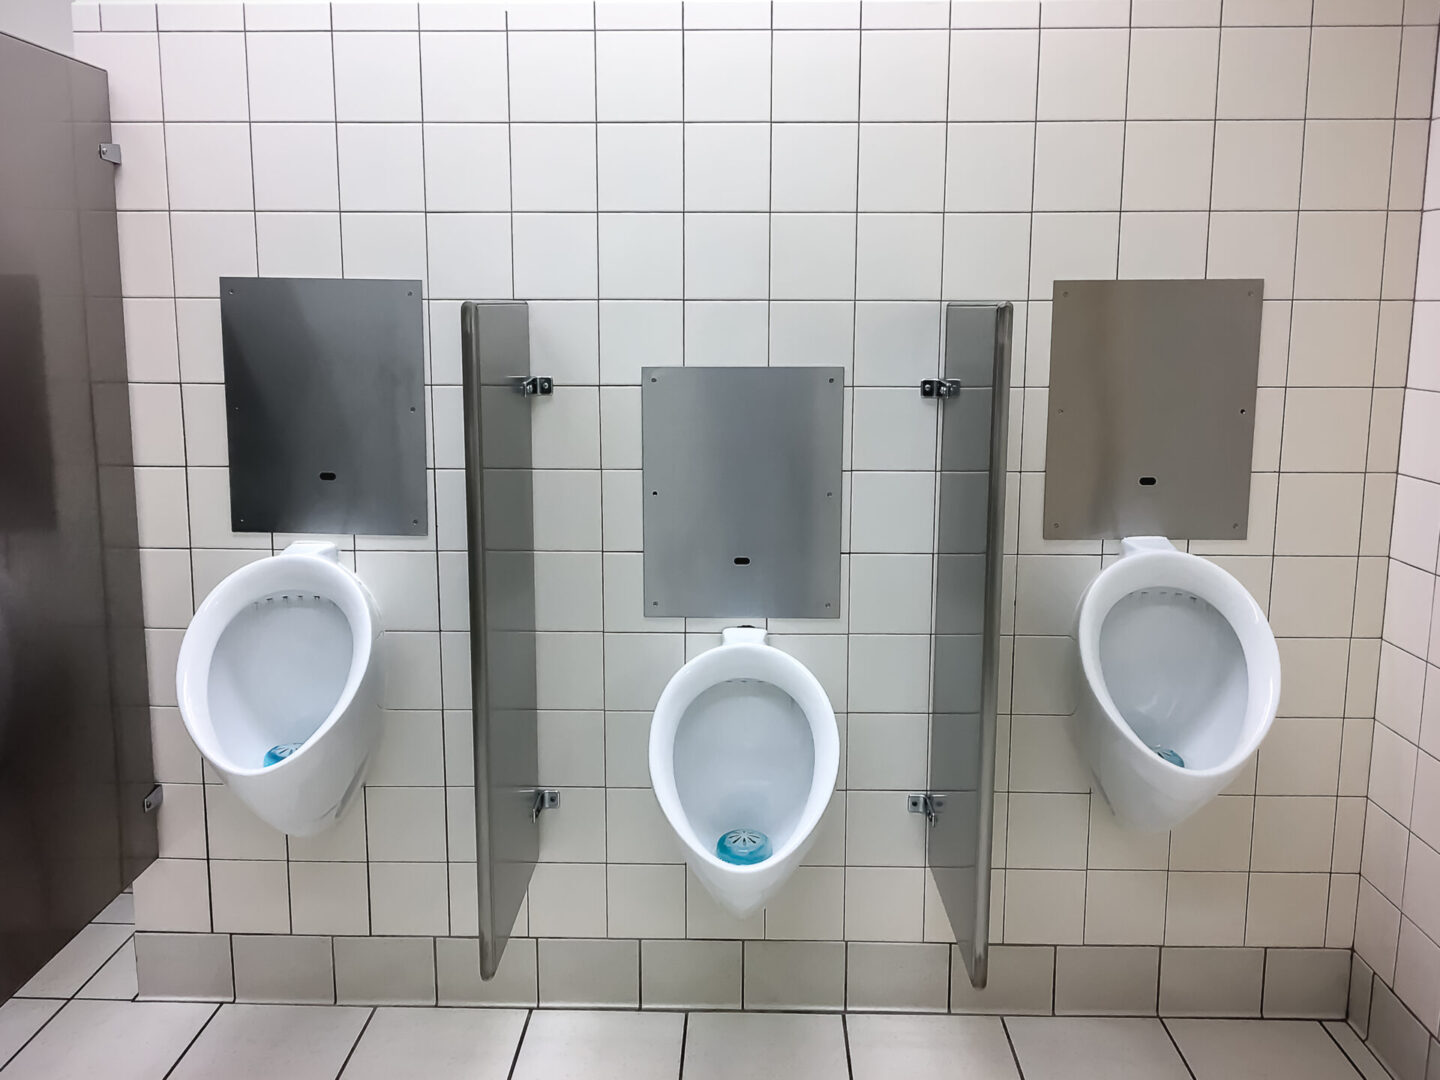 Three urinals are lined up against a wall.